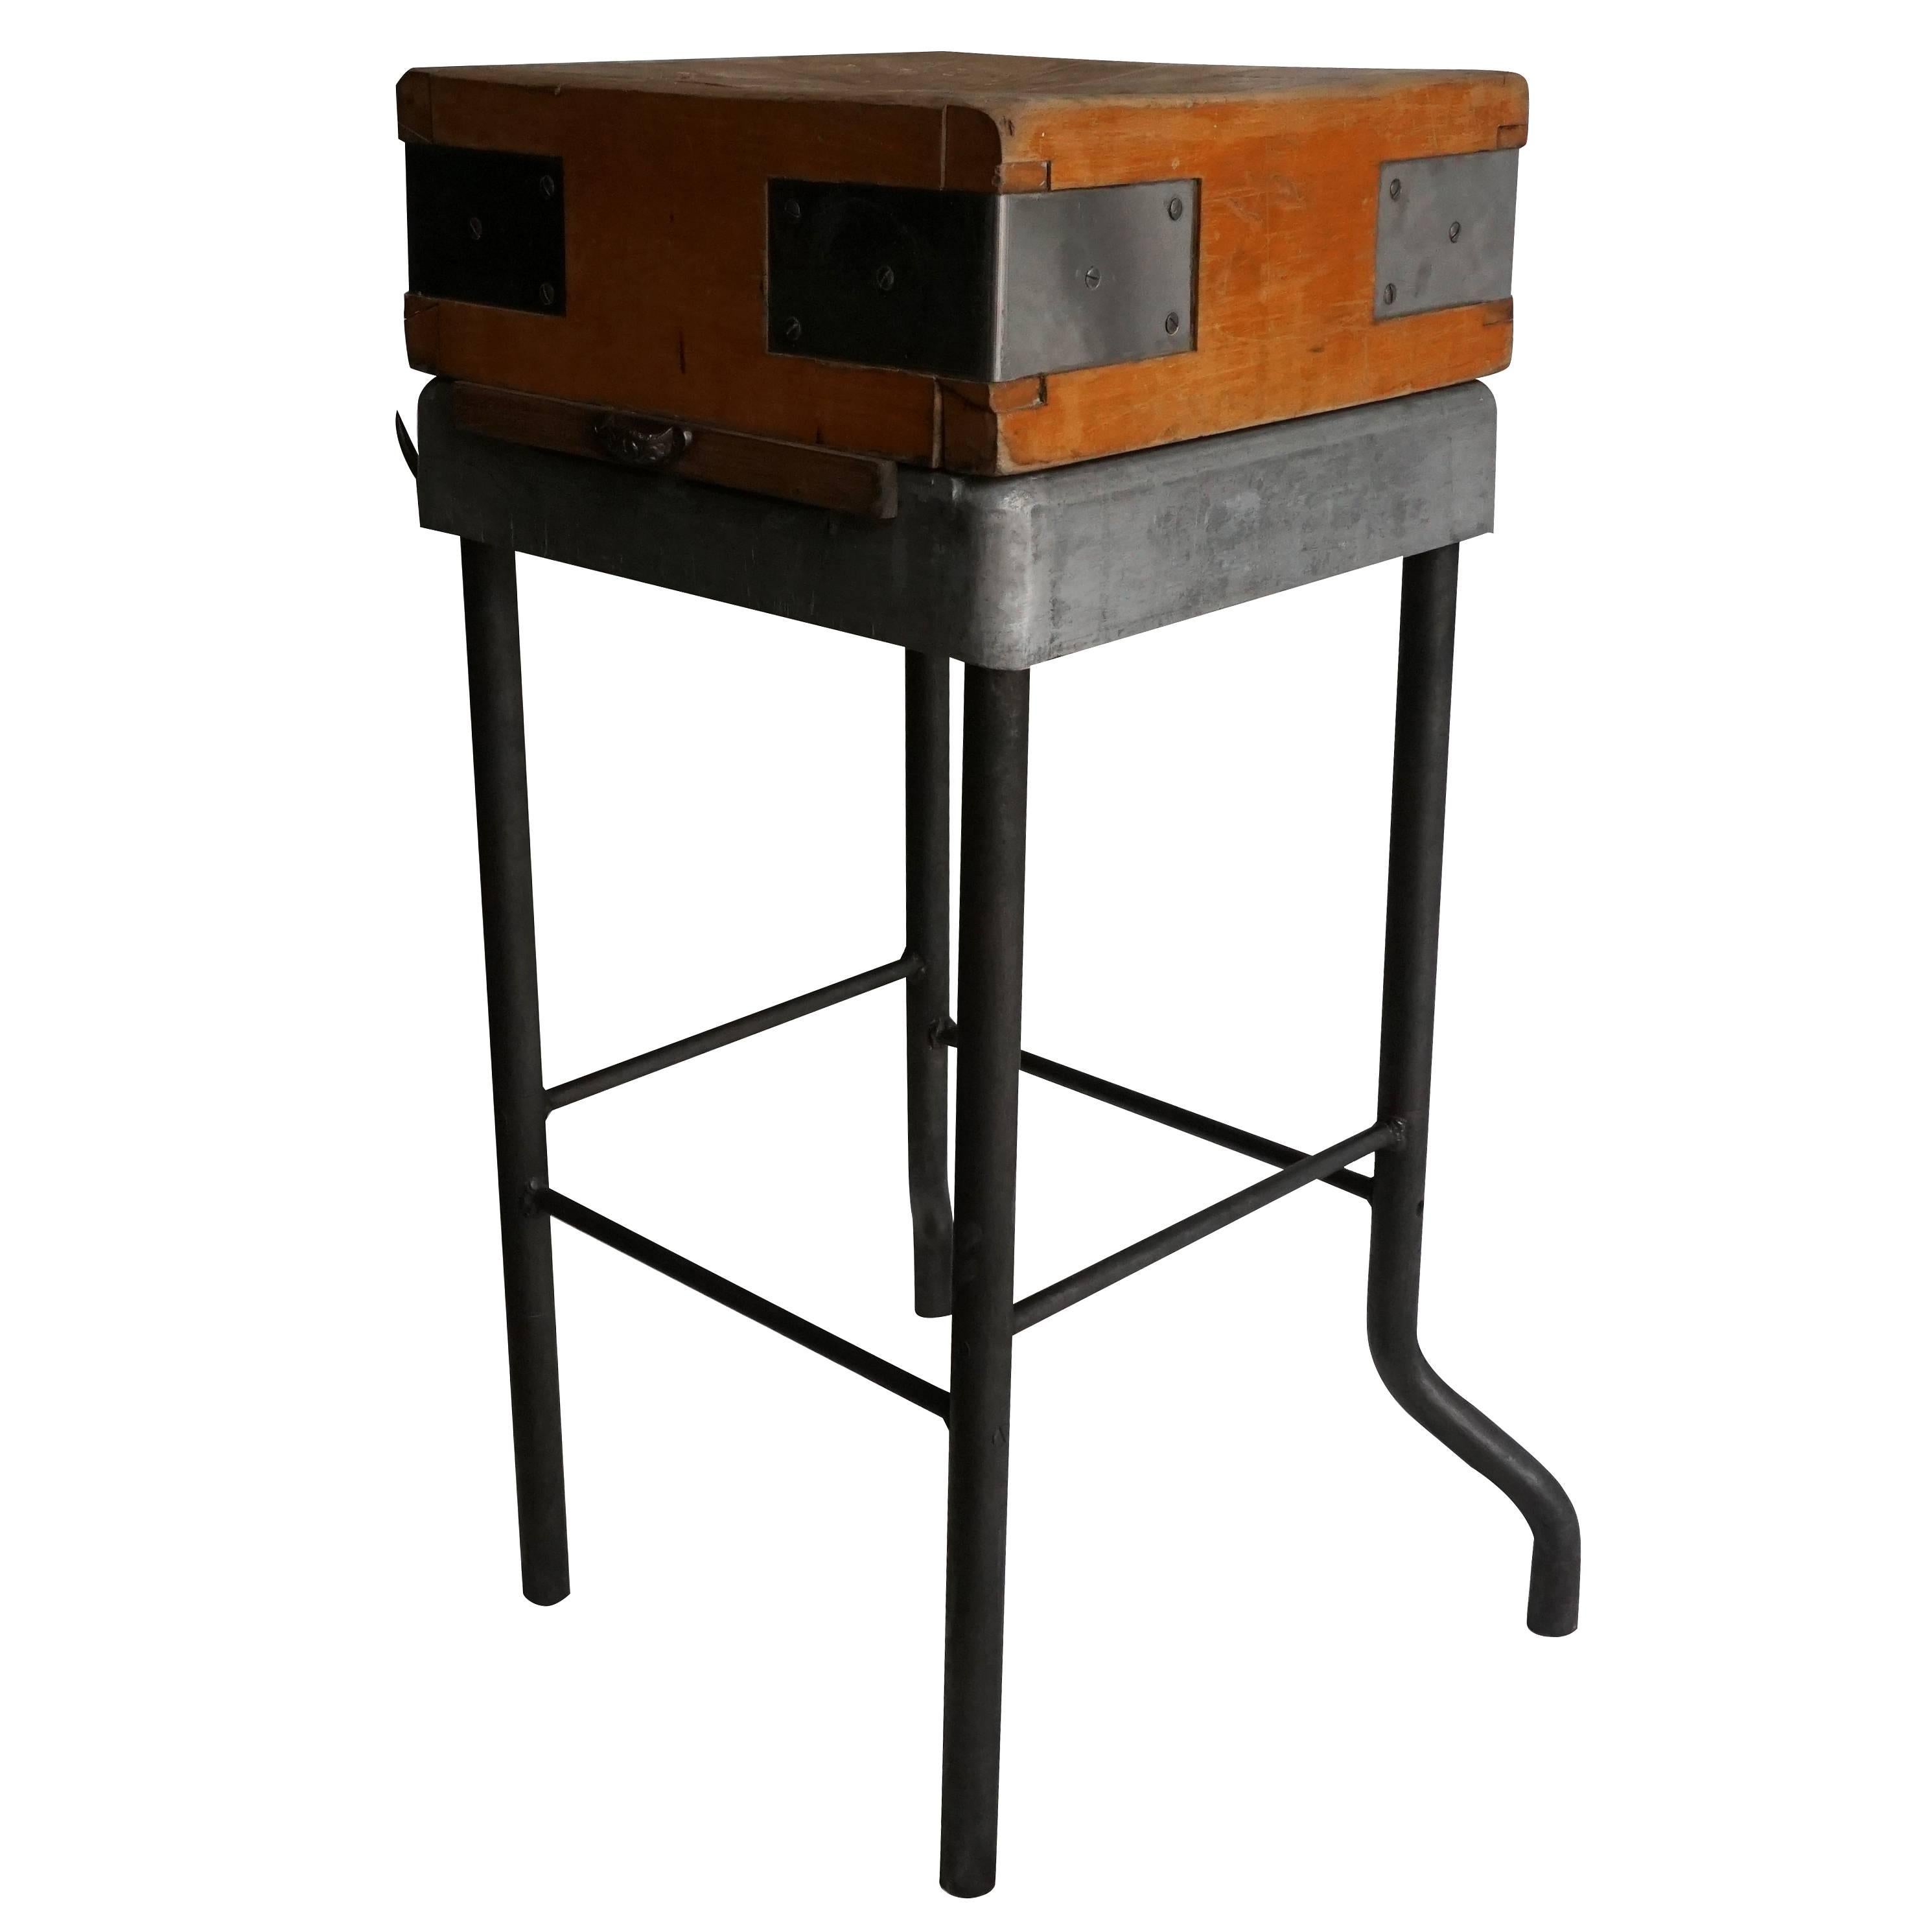 A rare vintage travelling butcher block from Strasbourg, France with a distressed, worn finish. The original butcher block is made of wood with reinforced metal corners. The block is was mounted on a steel base at a later date, with four lateral